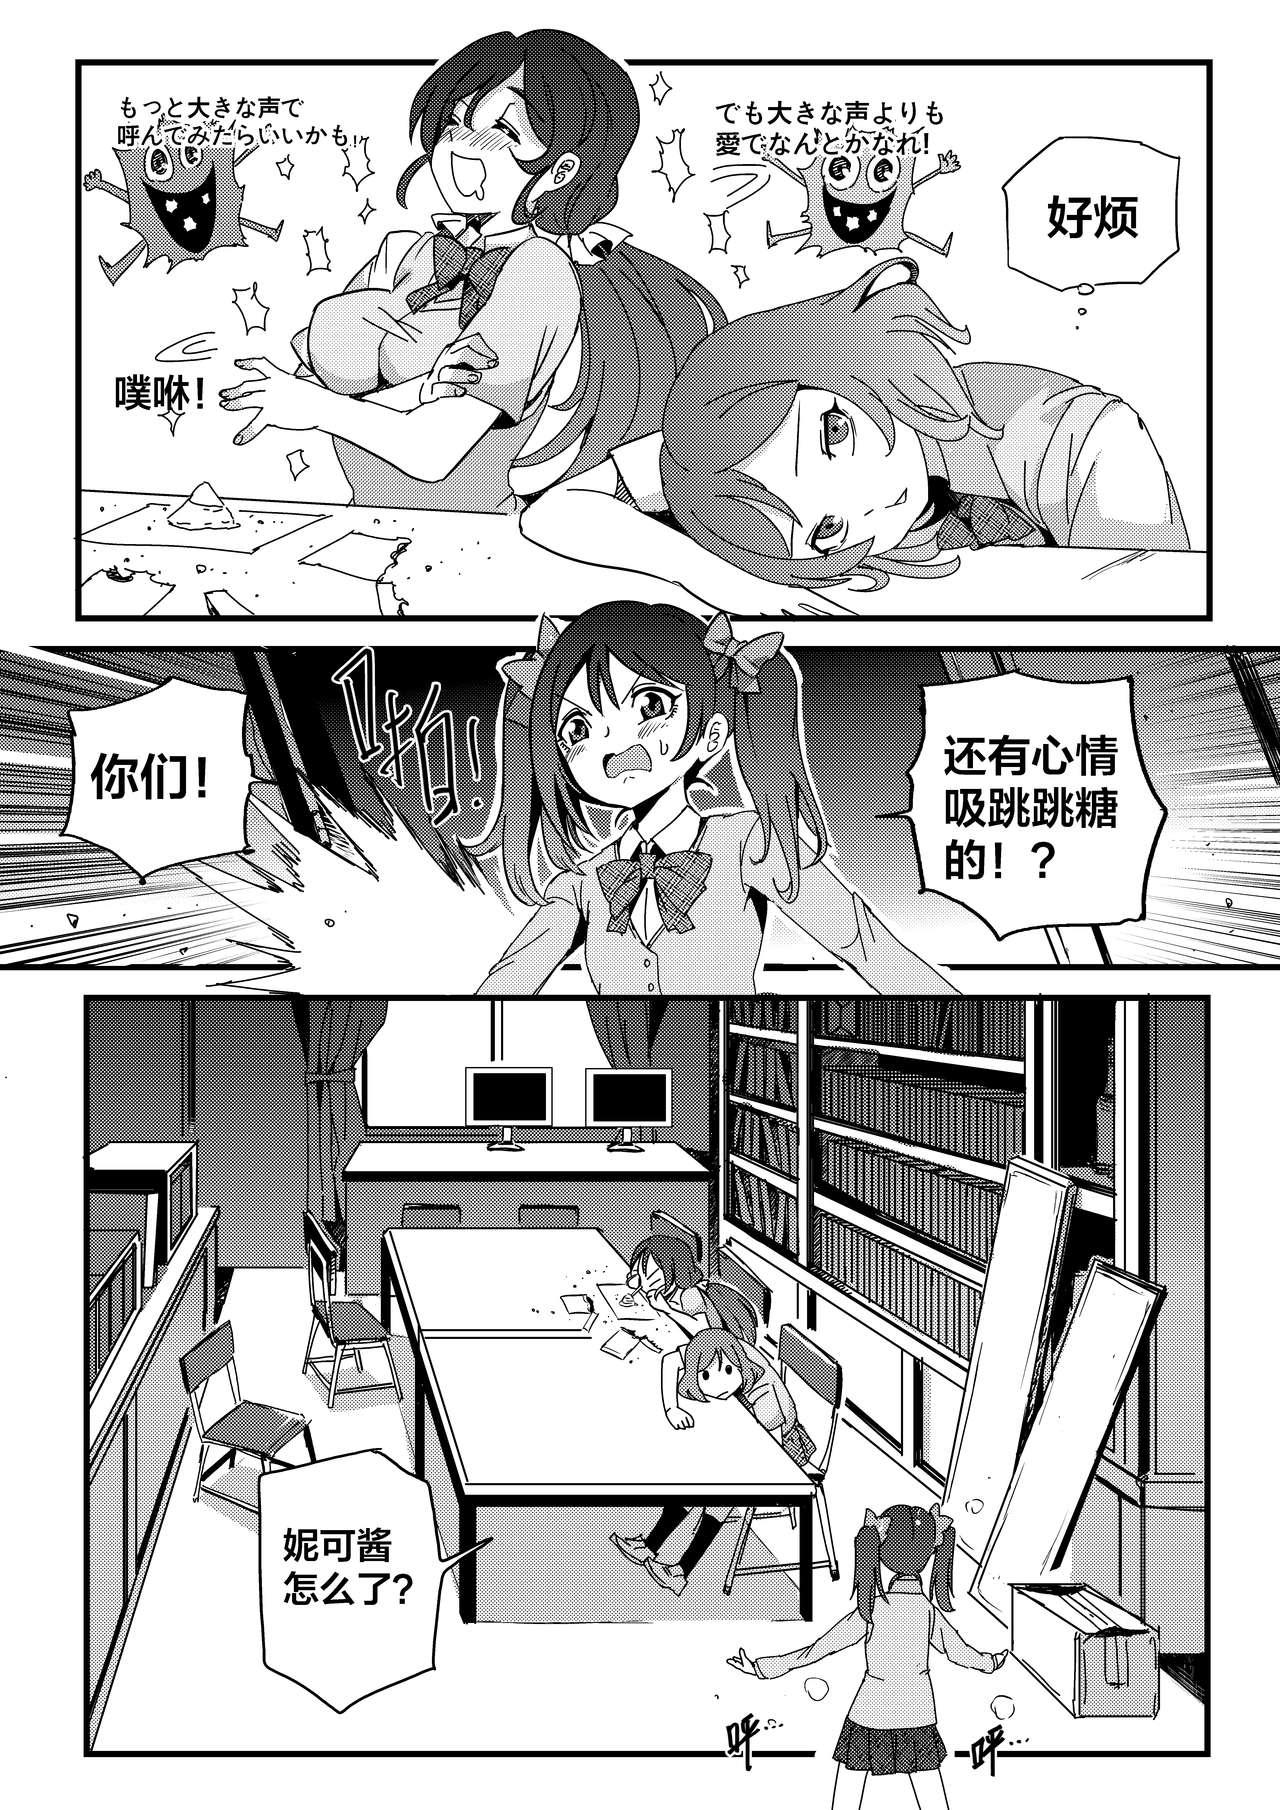 Bigcock 果胆卯威 - Kantai collection The idolmaster Love live Fucked Hard - Page 2